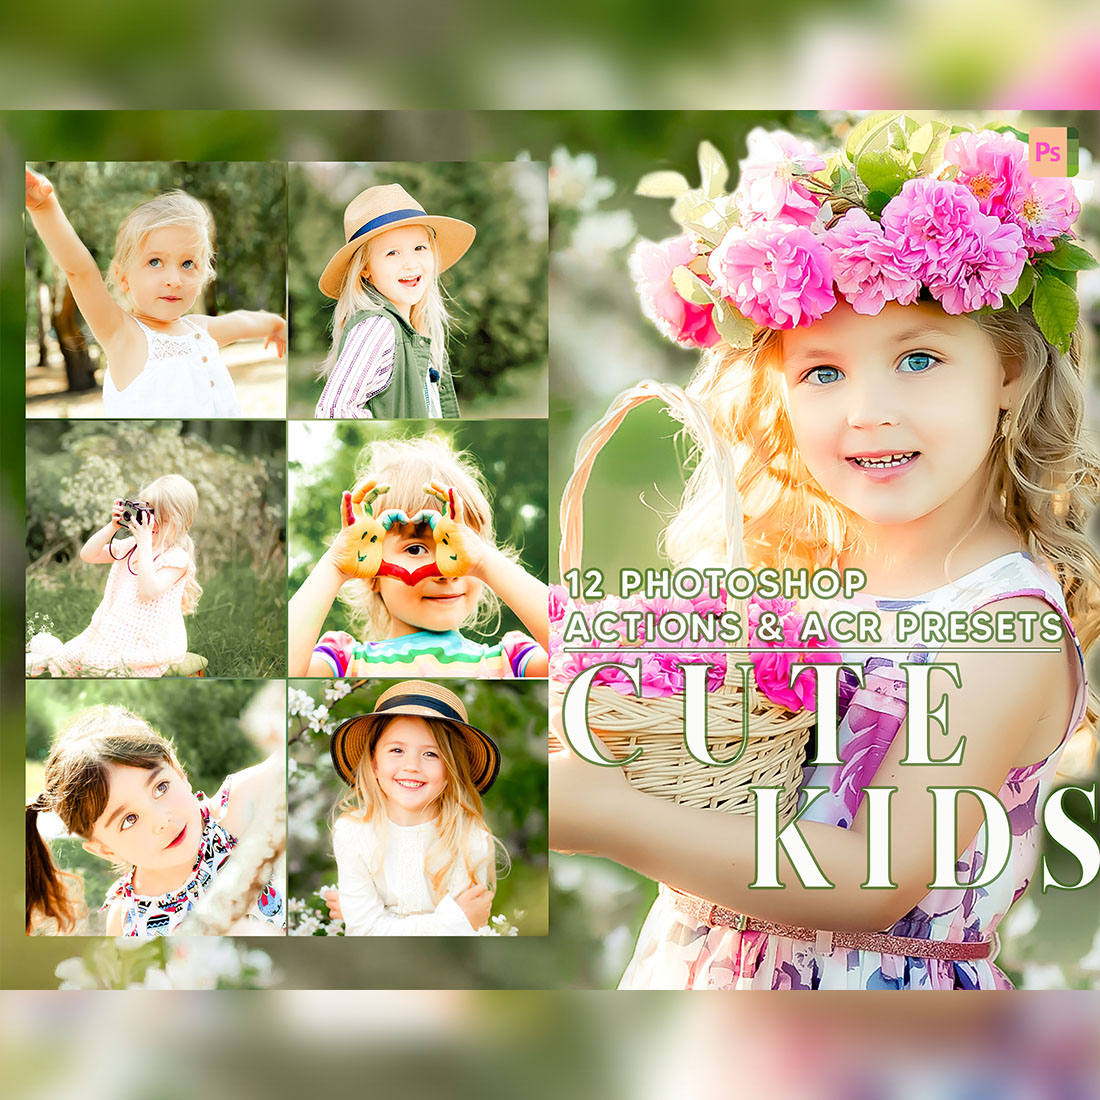 12 Photoshop Actions, Cute Kids Ps Action, Bright ACR Preset, Children Ps Filter, Portrait And Lifestyle Theme For Instagram, Blogger cover image.